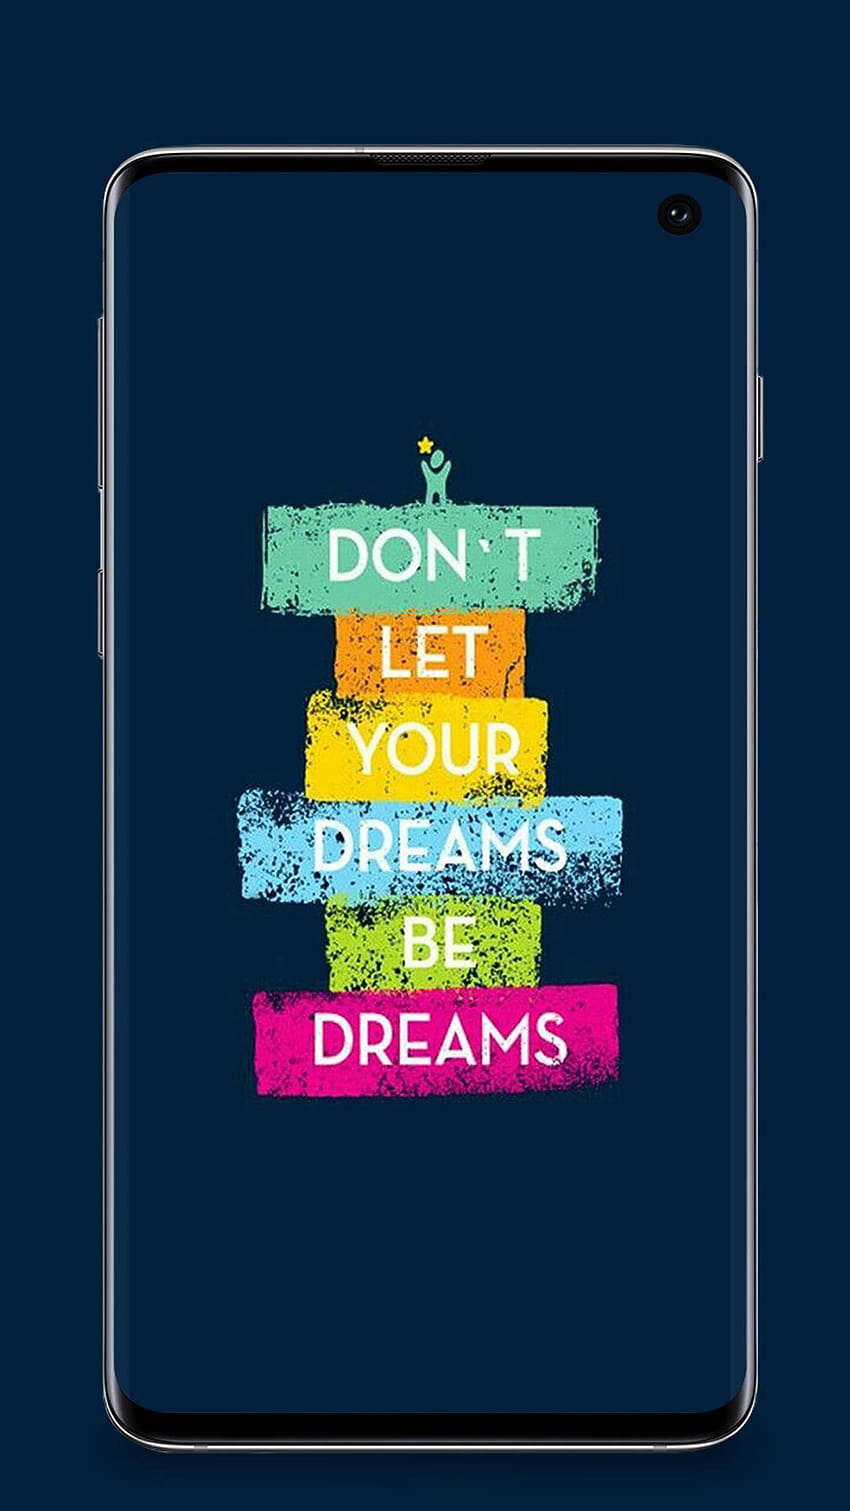 21 FREE phone wallpapers | Motivational quotes to brighten your day |  Rebecca Yates